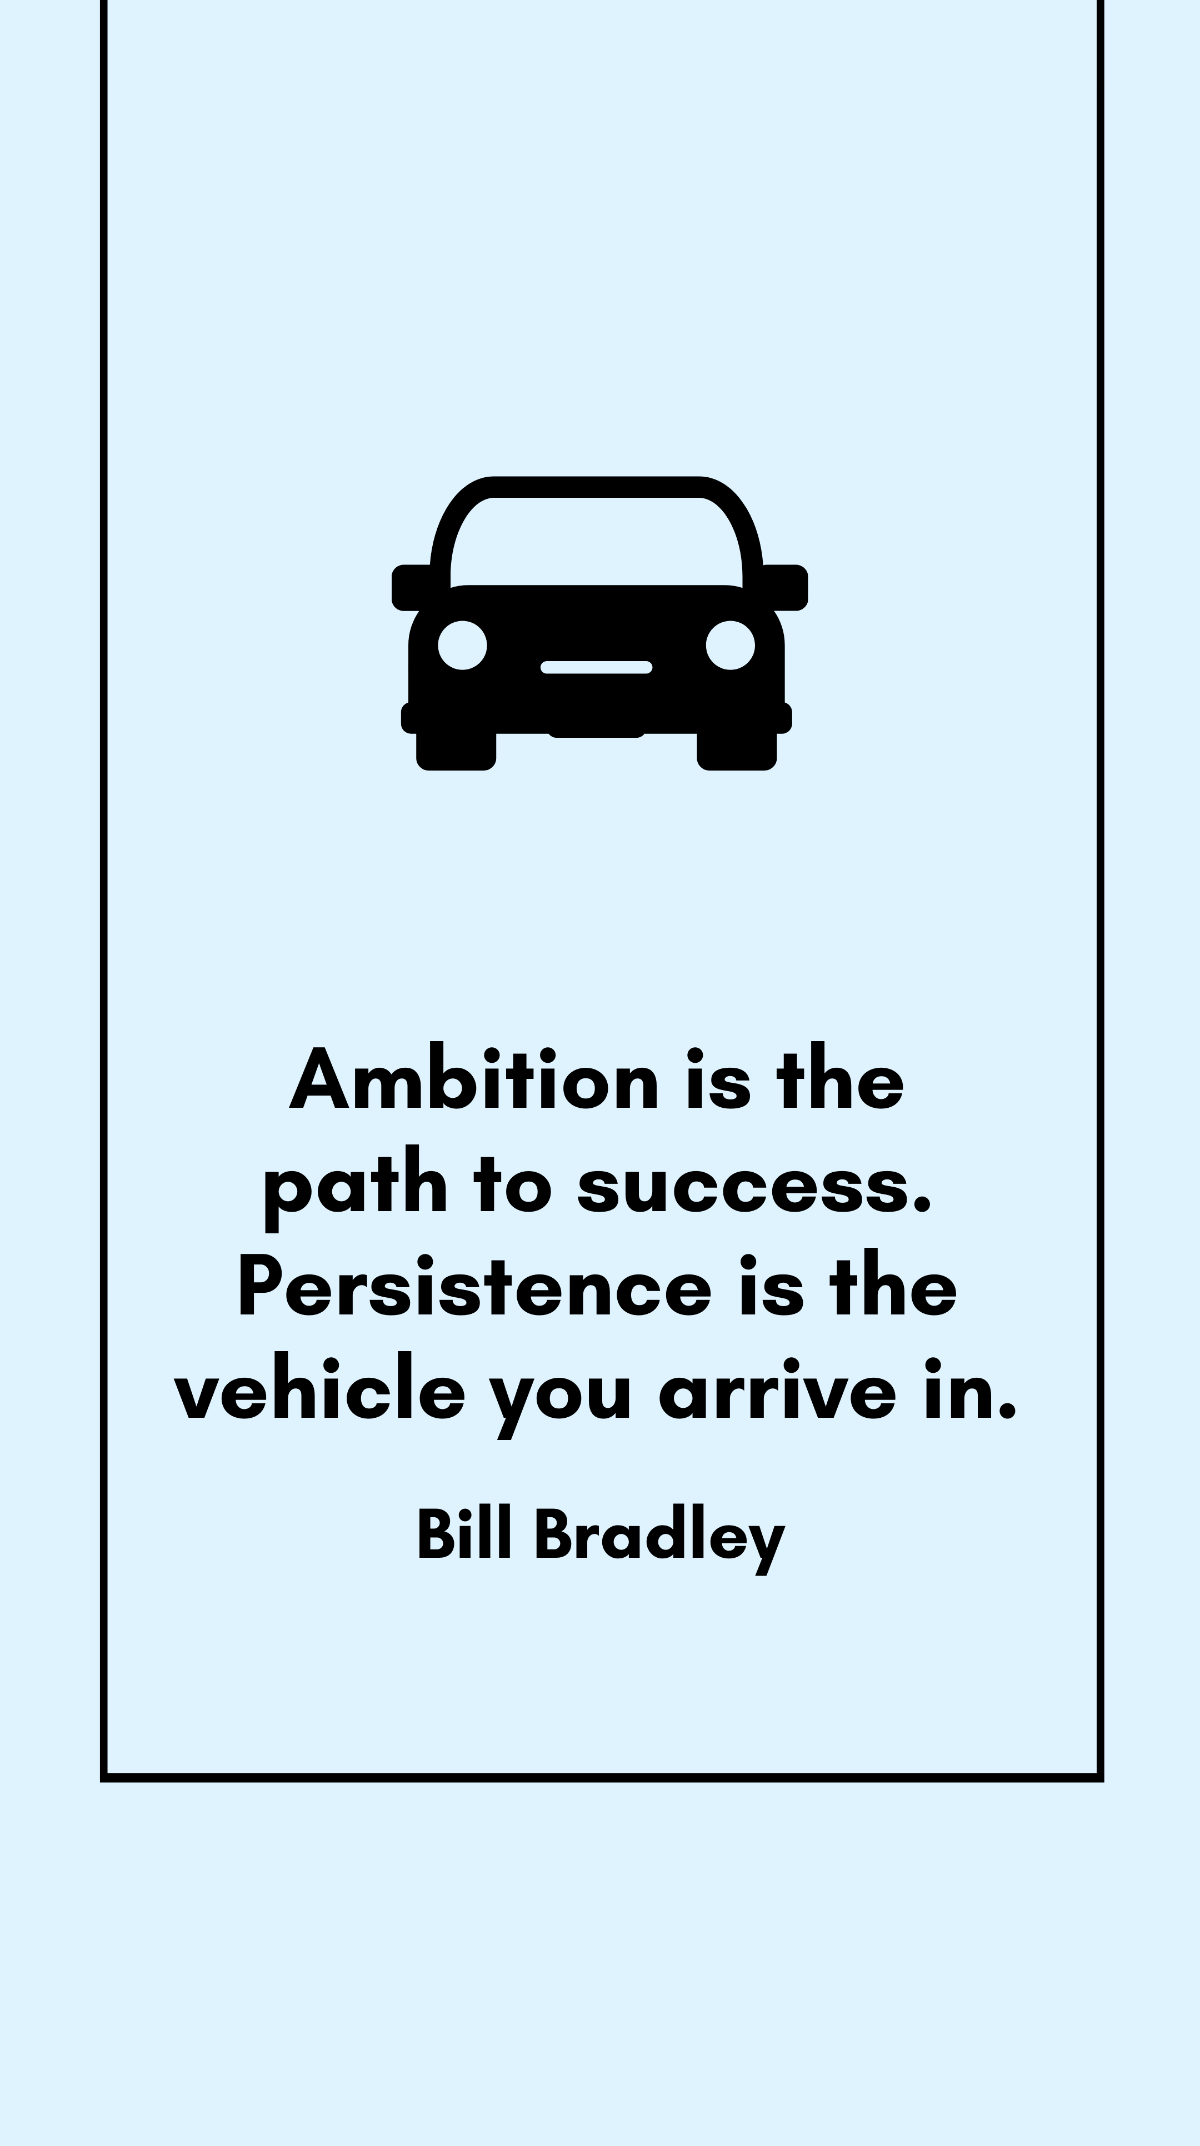 Bill Bradley - Ambition is the path to success. Persistence is the vehicle you arrive in.